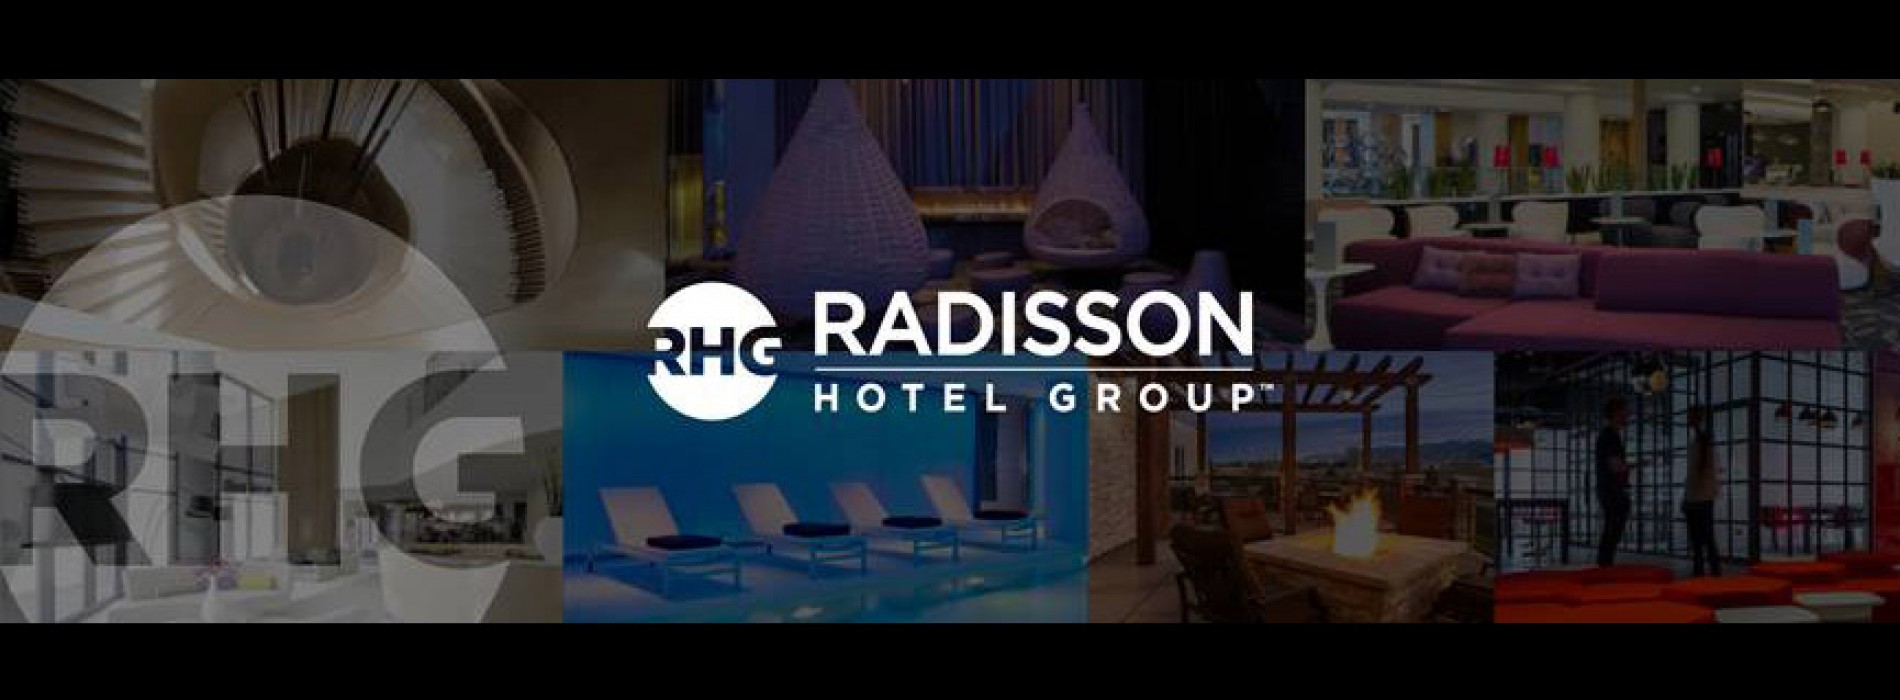 Radisson Hotel Group raises USD 445,000 to provide a better future for children and young people